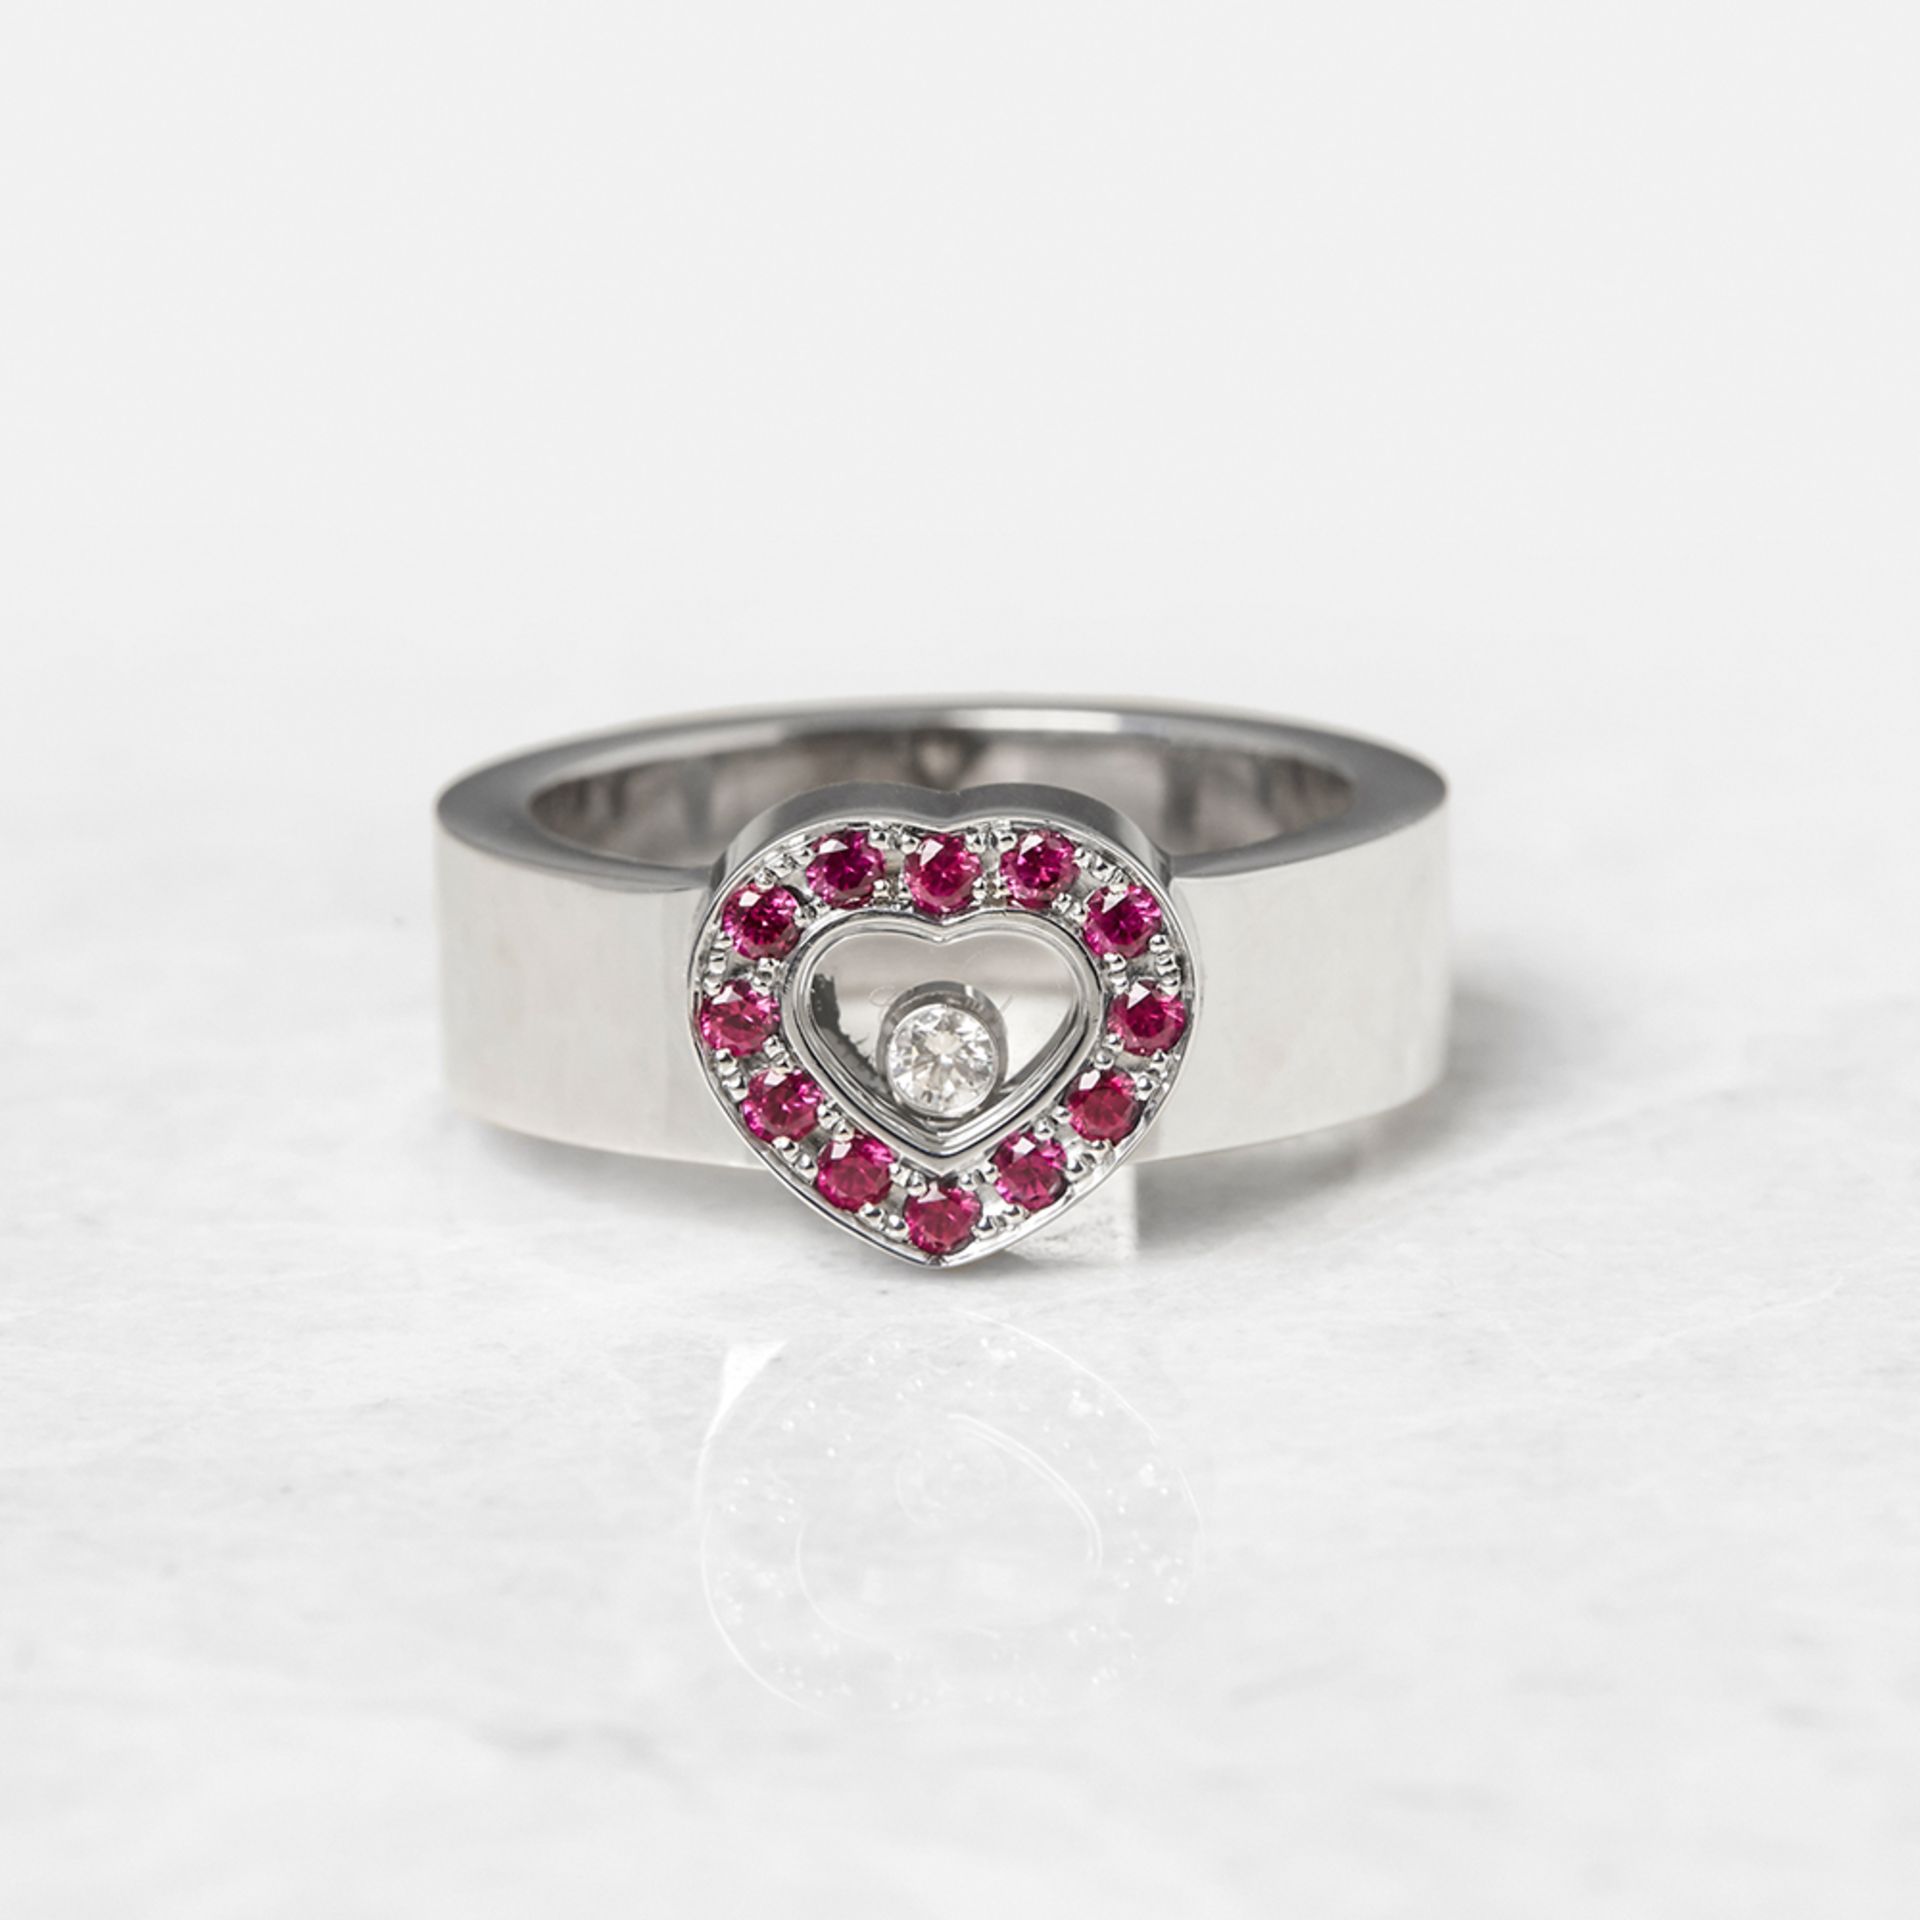 Chopard 18k White Gold Happy Diamonds Ruby Ring - Image 2 of 7